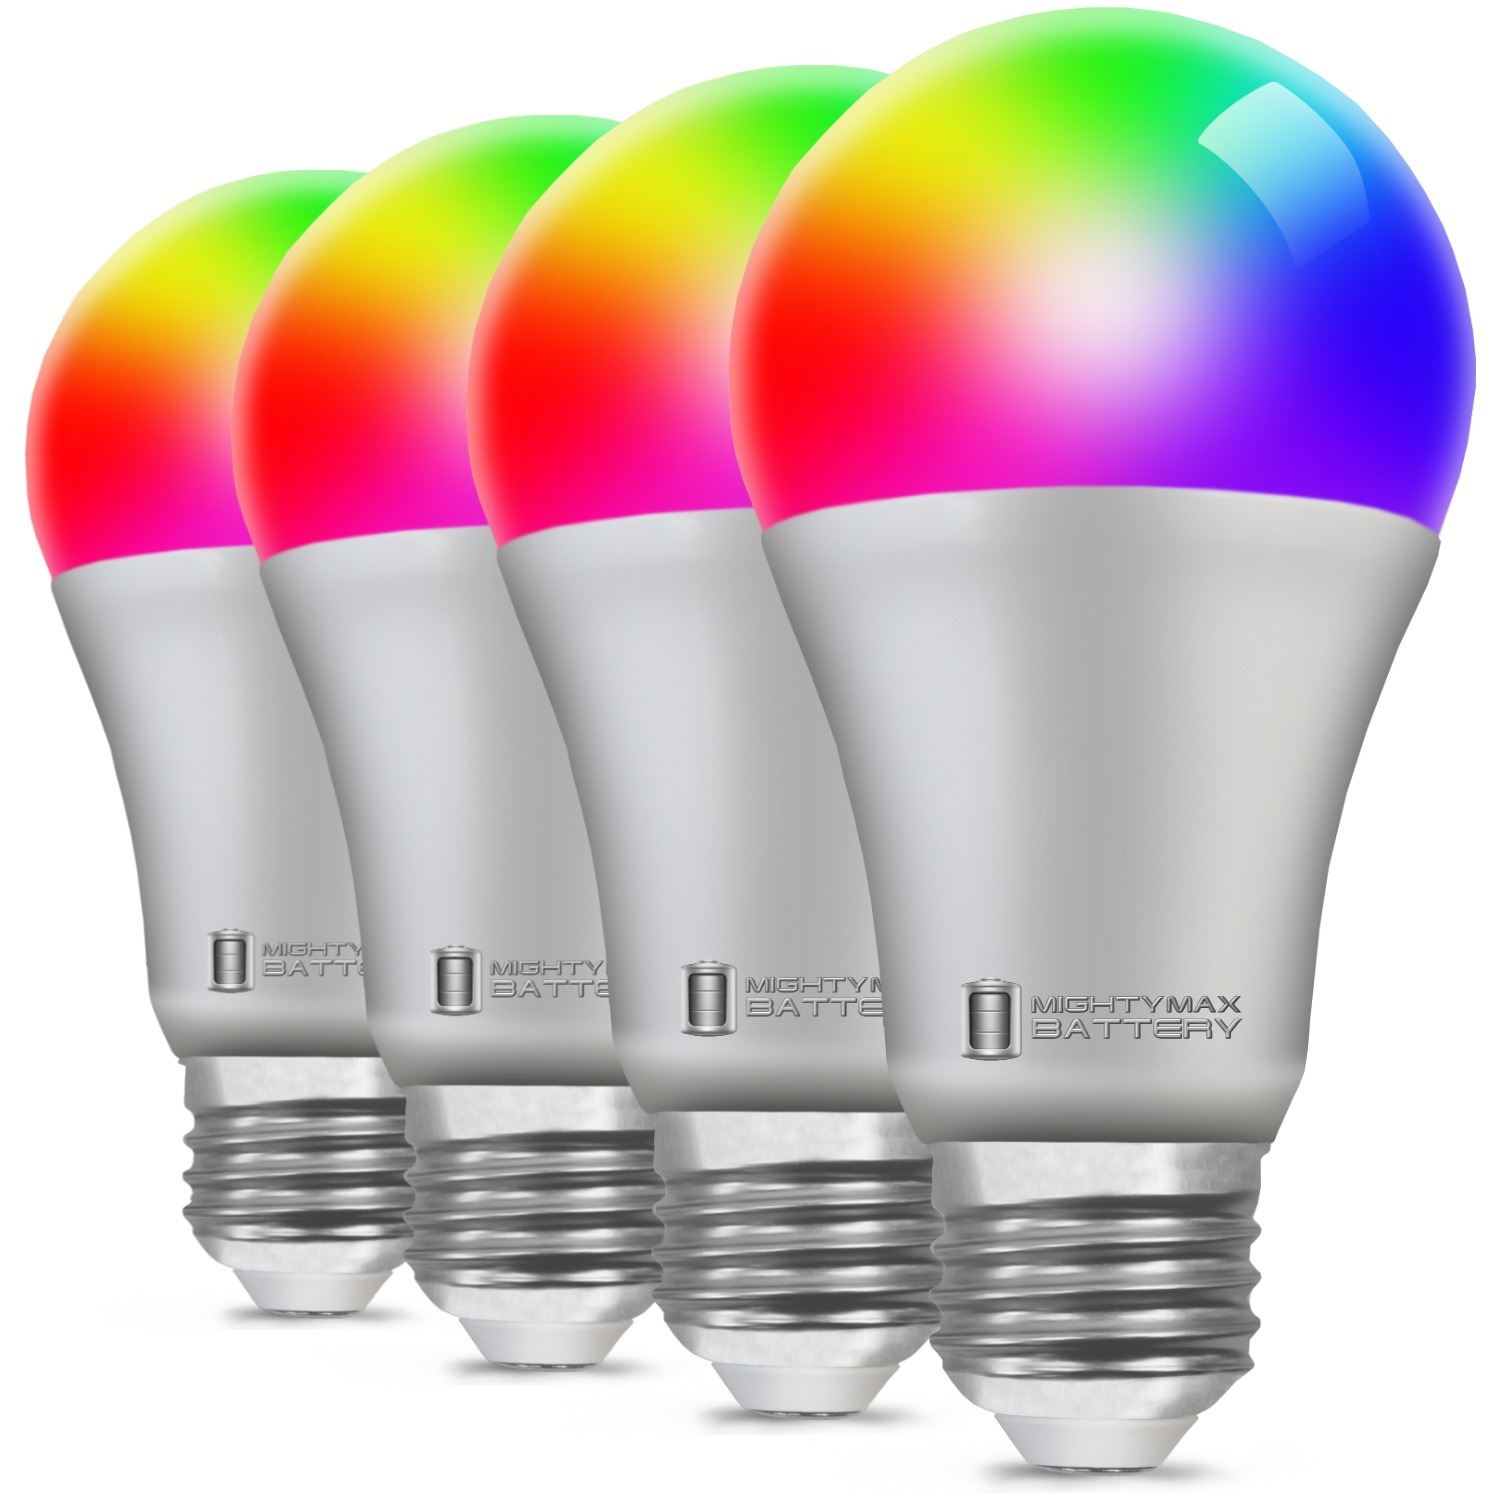 Mighty Max LED Smart Light Bulbs 4 Pack